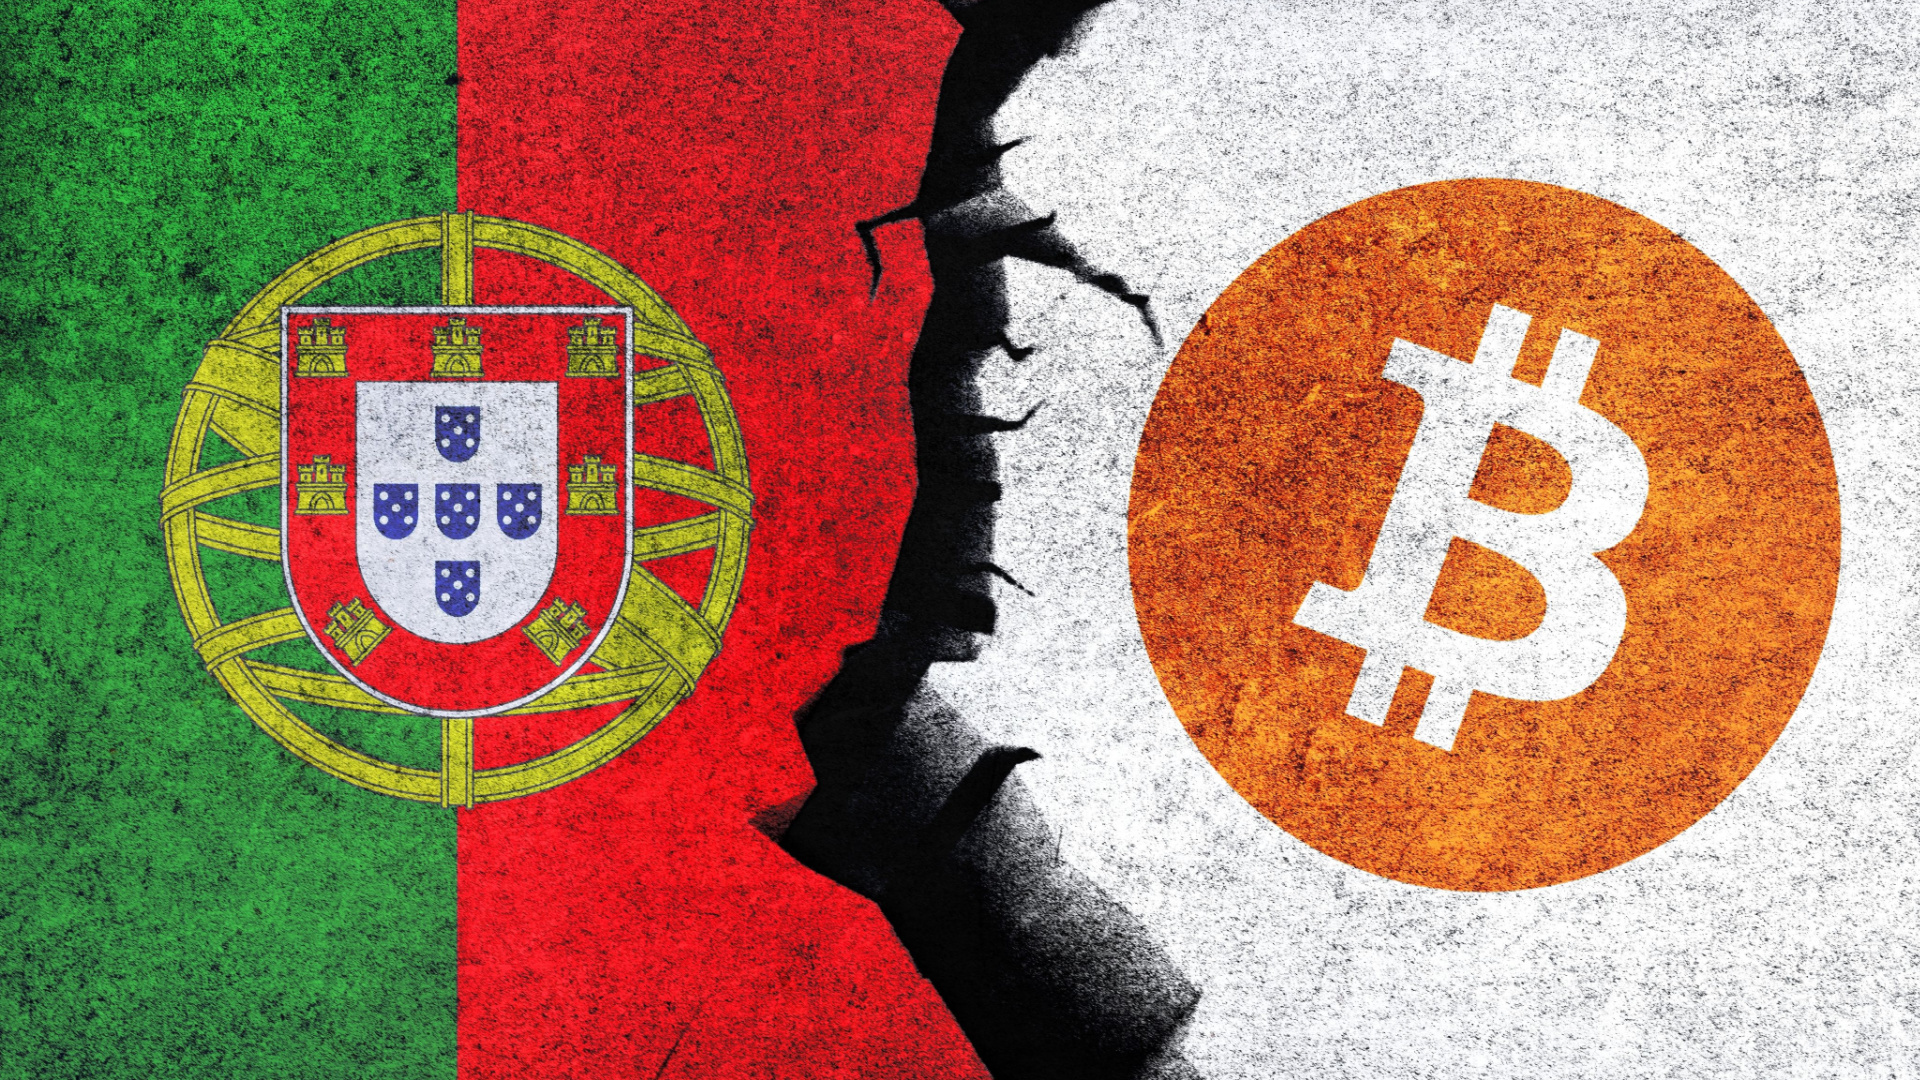 Portugal – Cryptocurrency earnings will be taxed from 2023